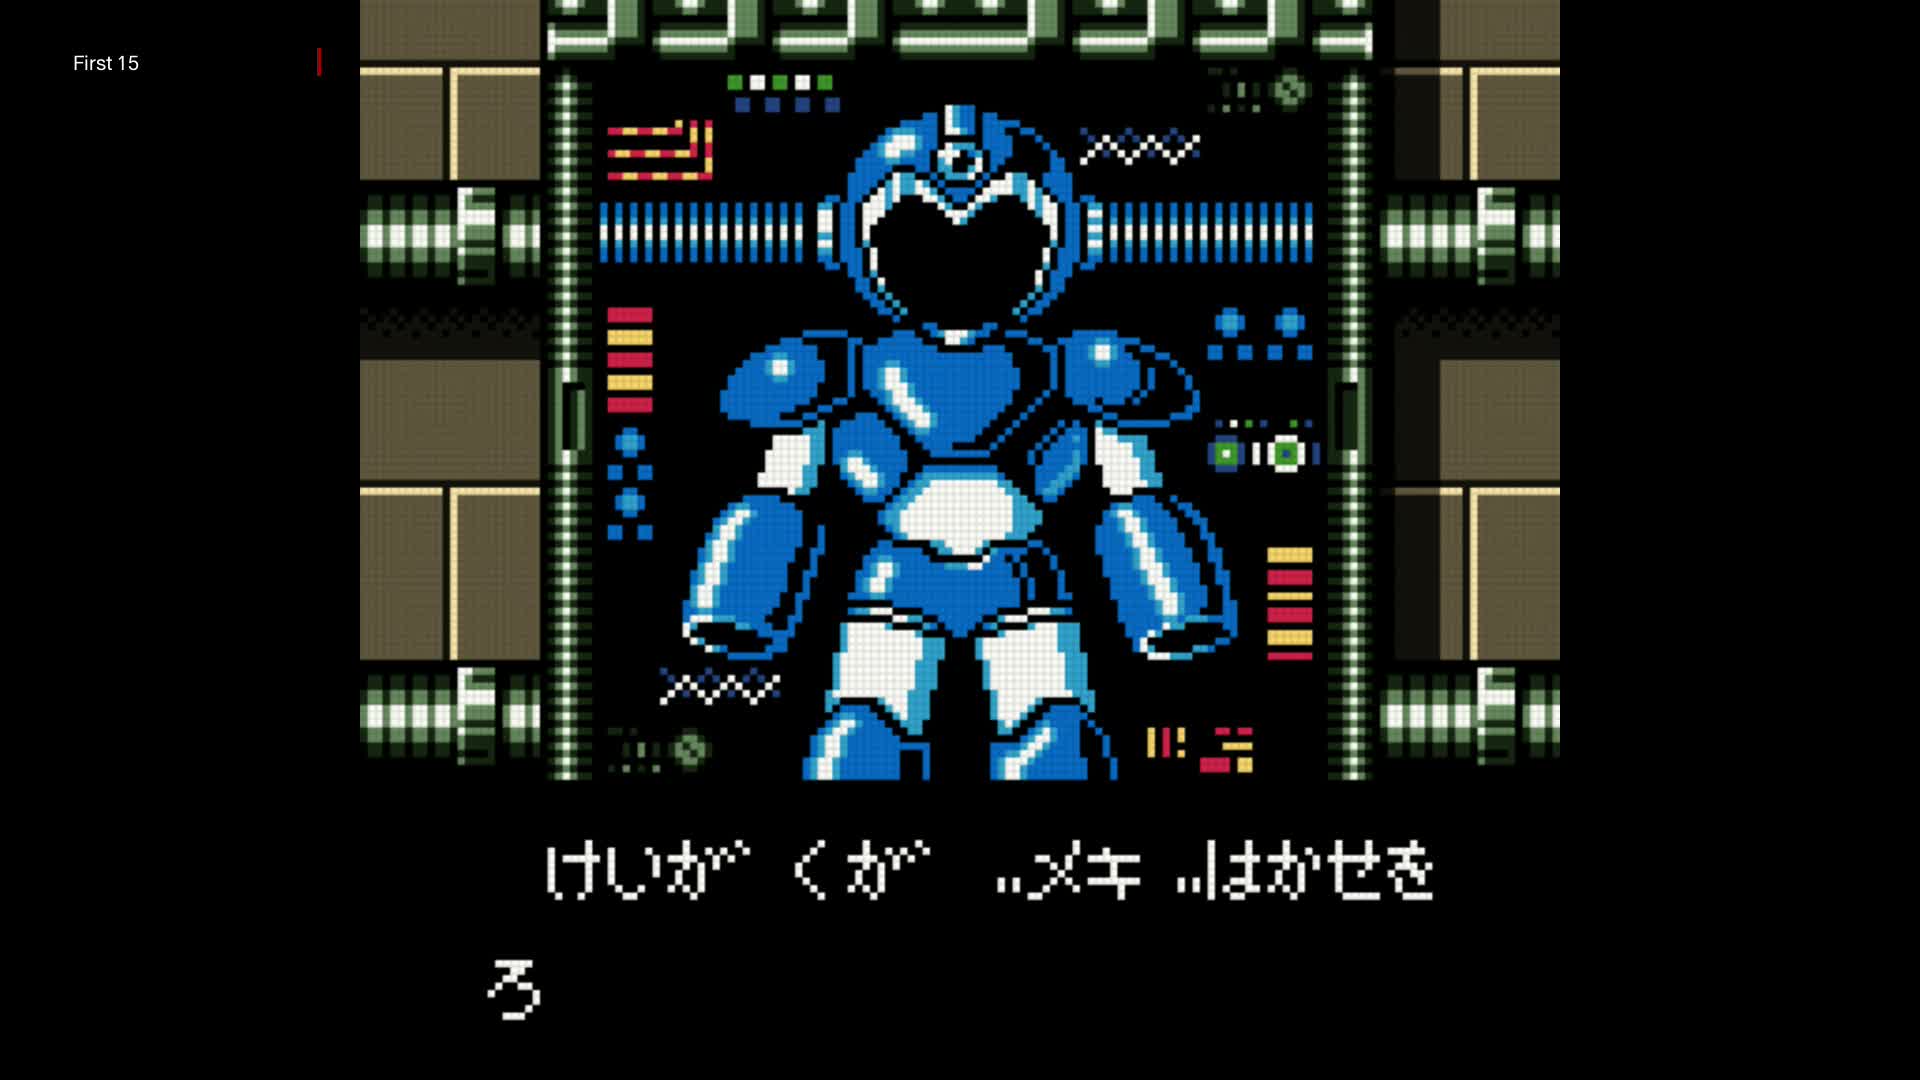 The First 15 Mintues of 路克英雄Z: Zook Hero Z (Game Boy Color)